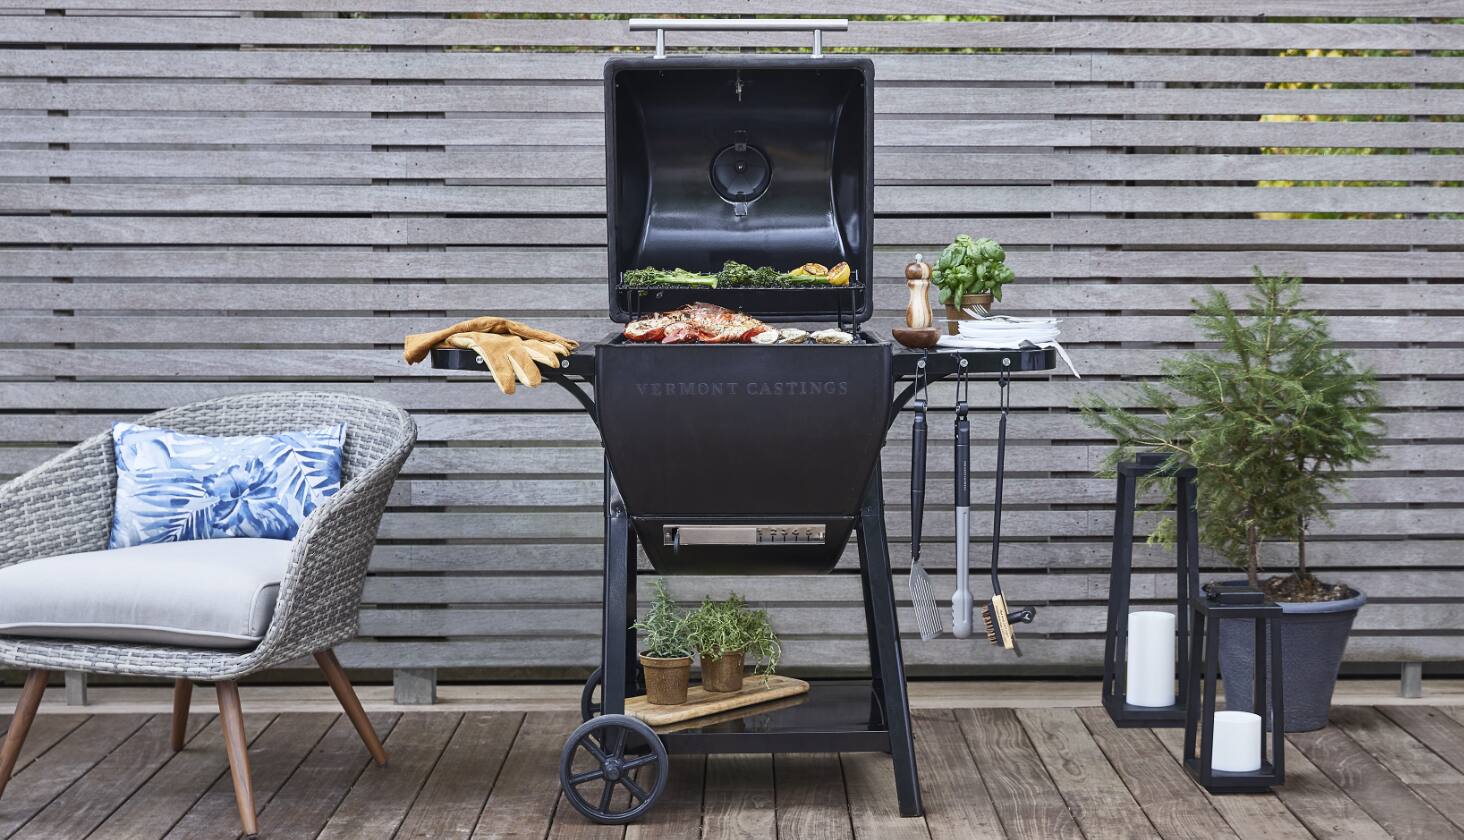 VERMONT CASTINGS PIONEER™ CHARCOAL KAMADO BBQ GRILL